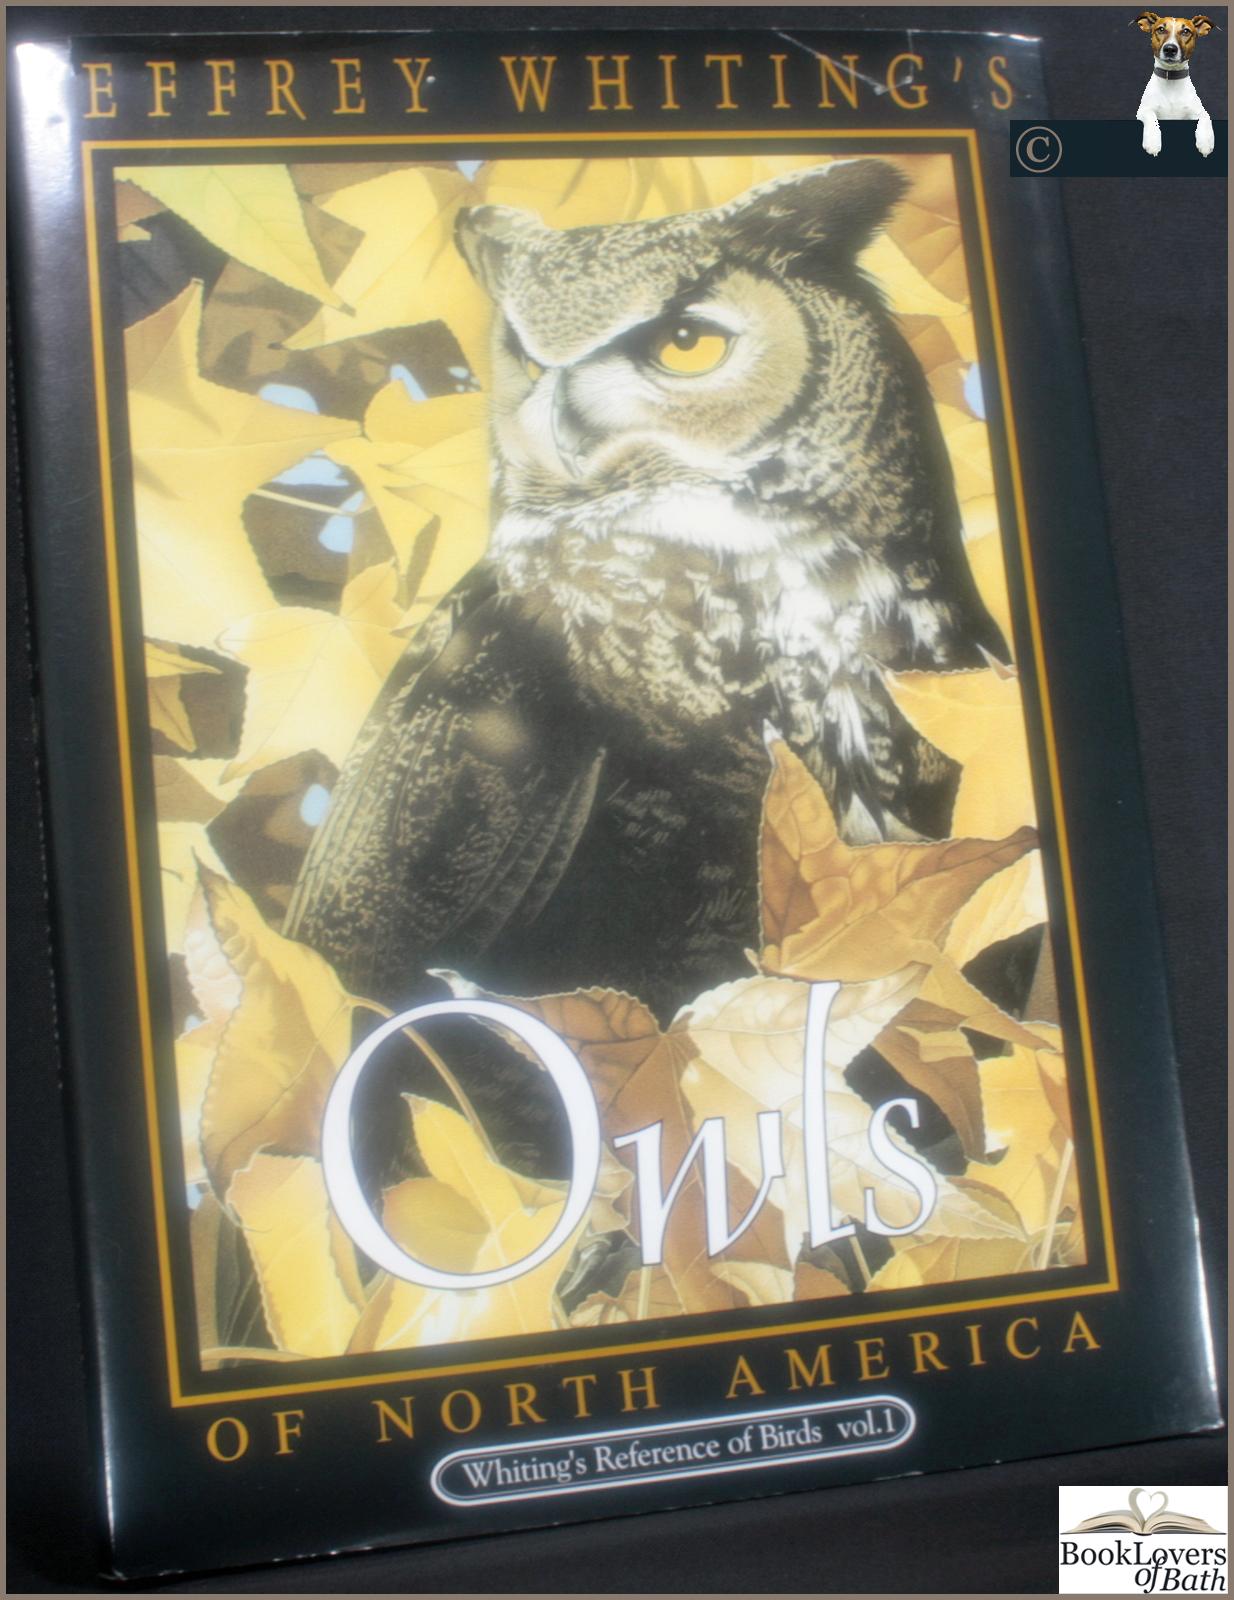 Jeffrey Whiting's Owls of North America